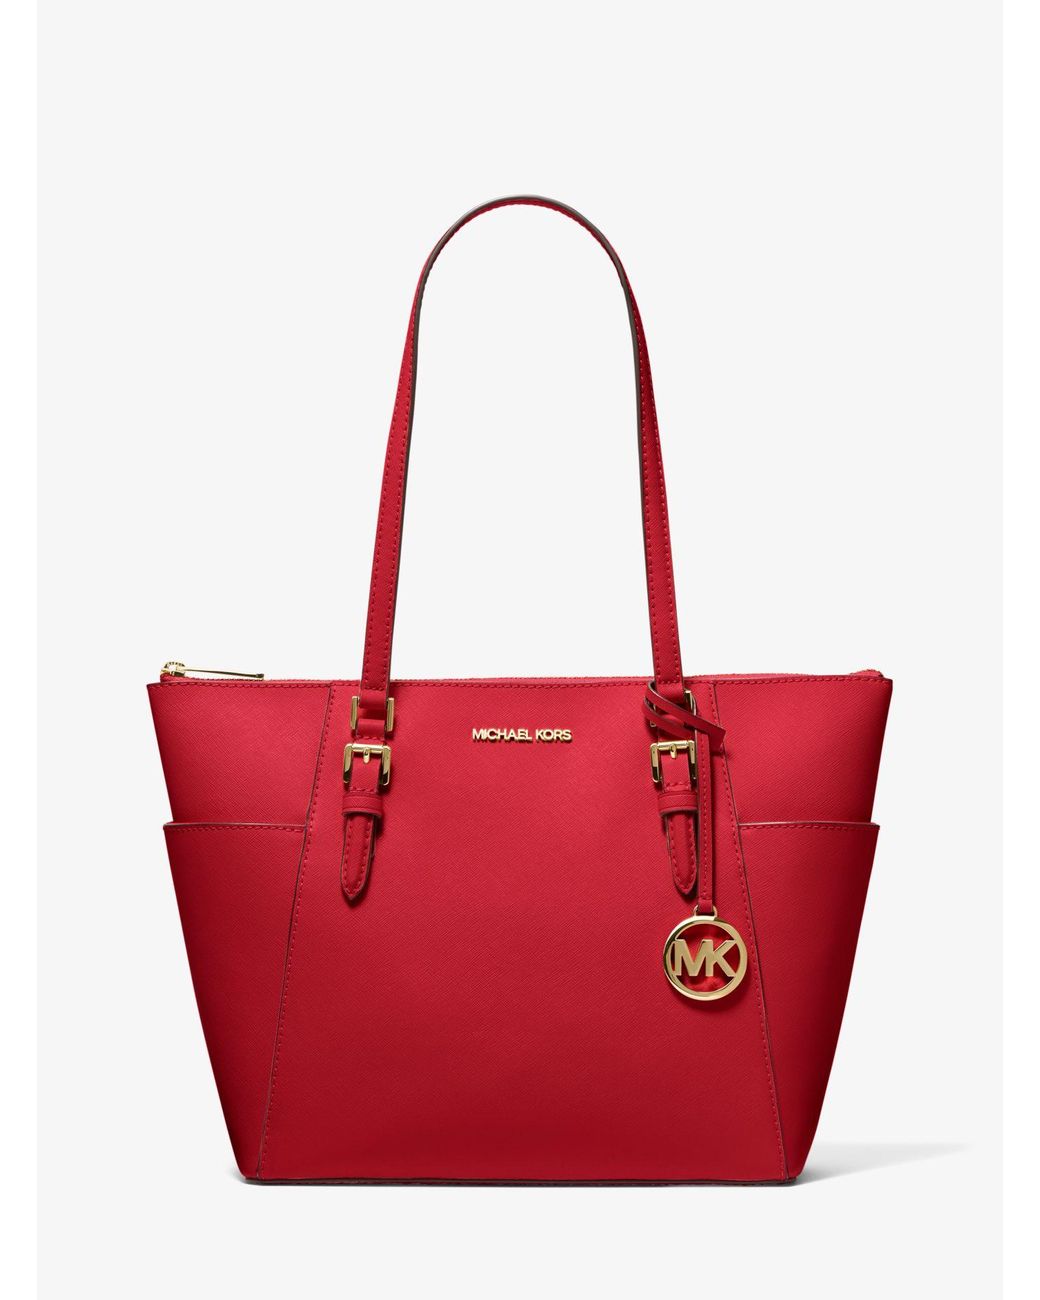 Michael Kors Charlotte Large Saffiano Leather Top-zip Tote Bag in Red ...